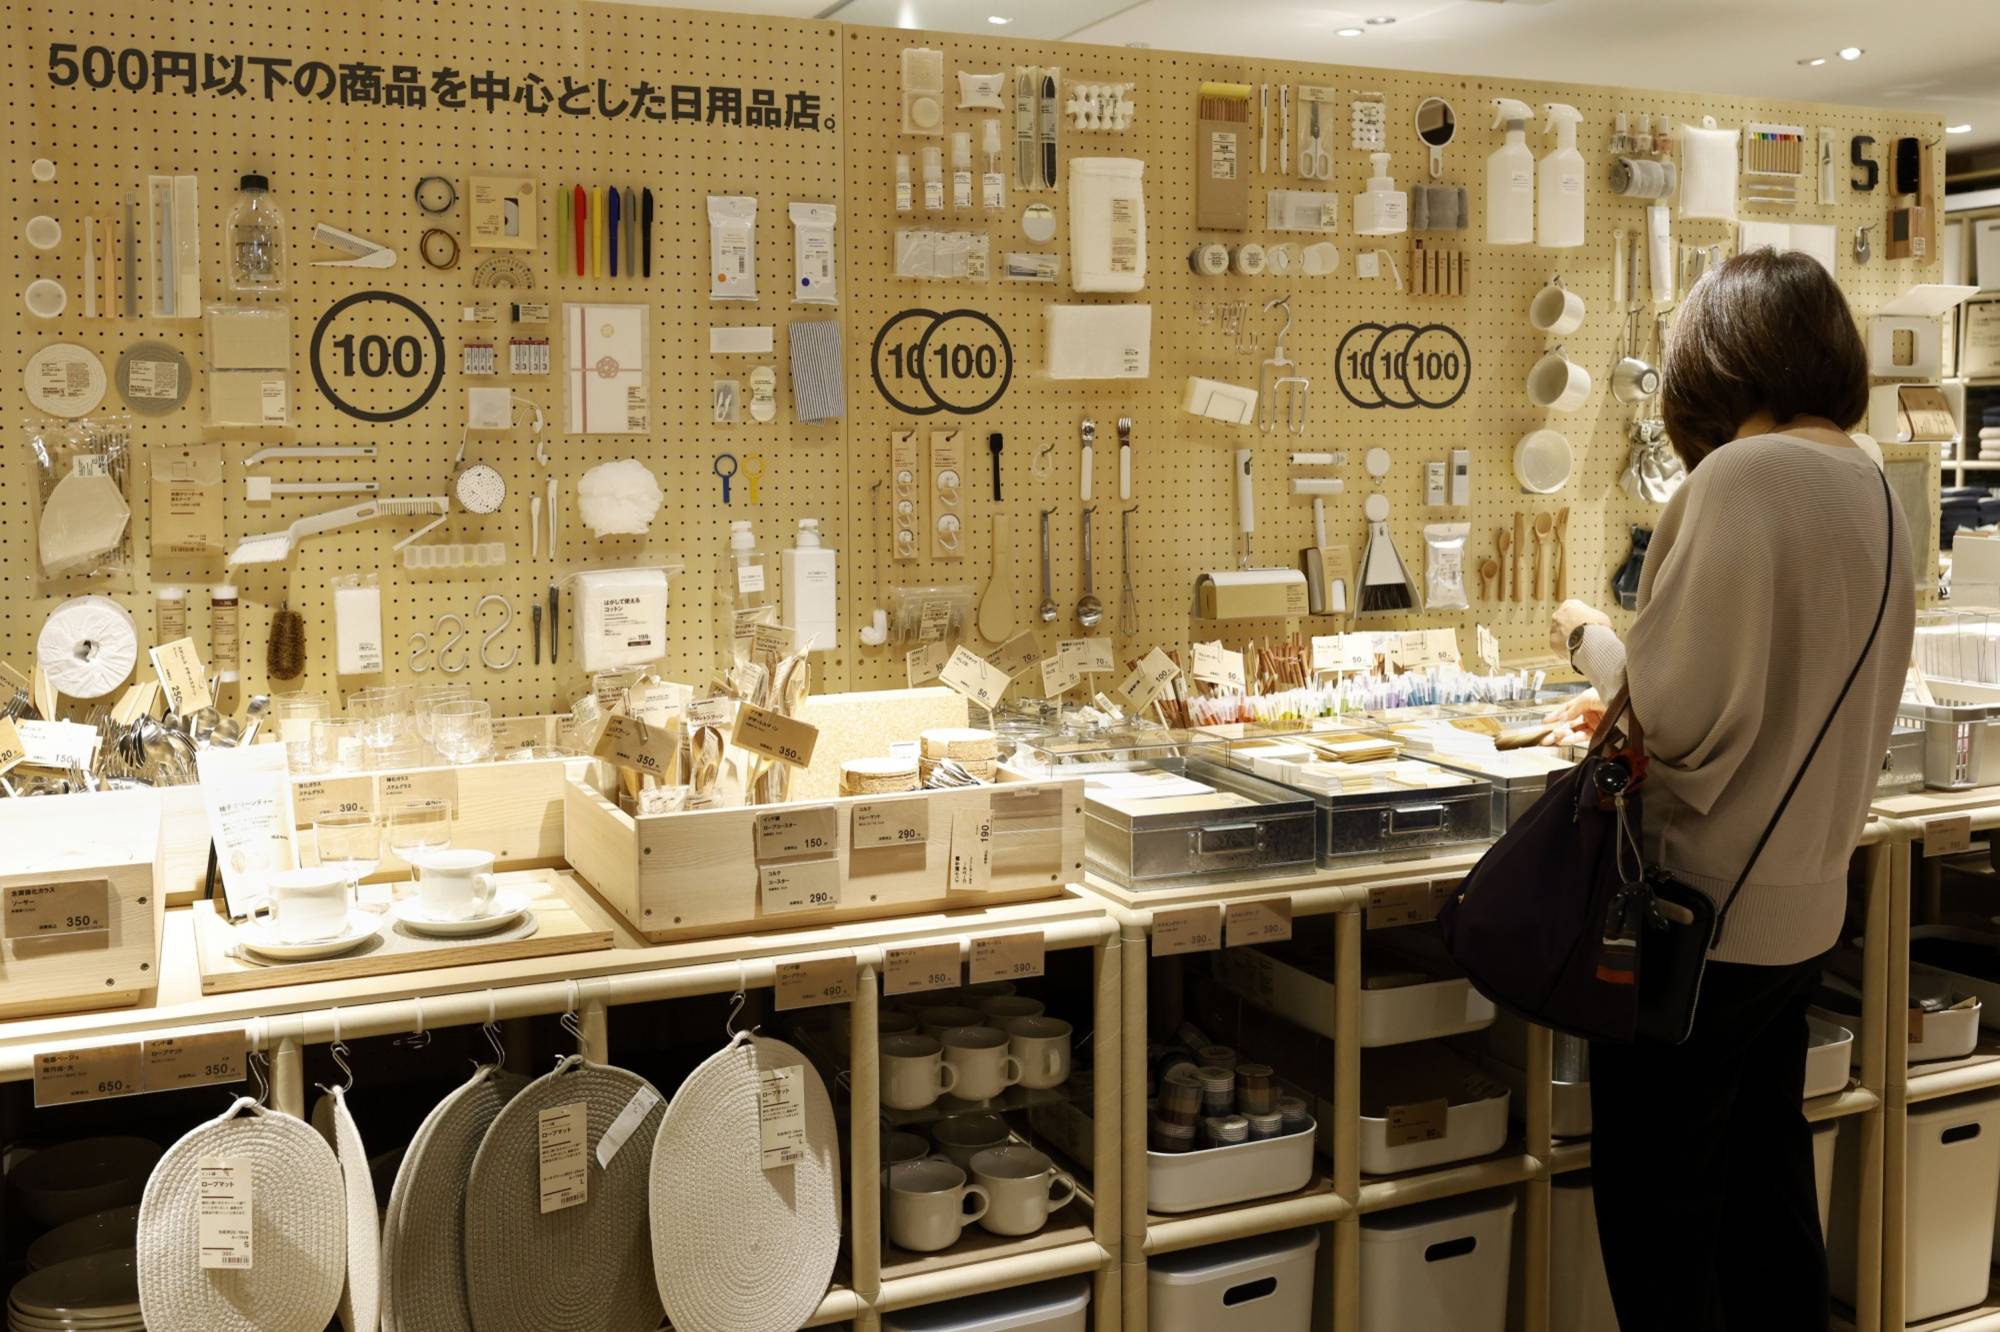 Muji opens new shops in Japan with items for less than $4 - The Japan Times